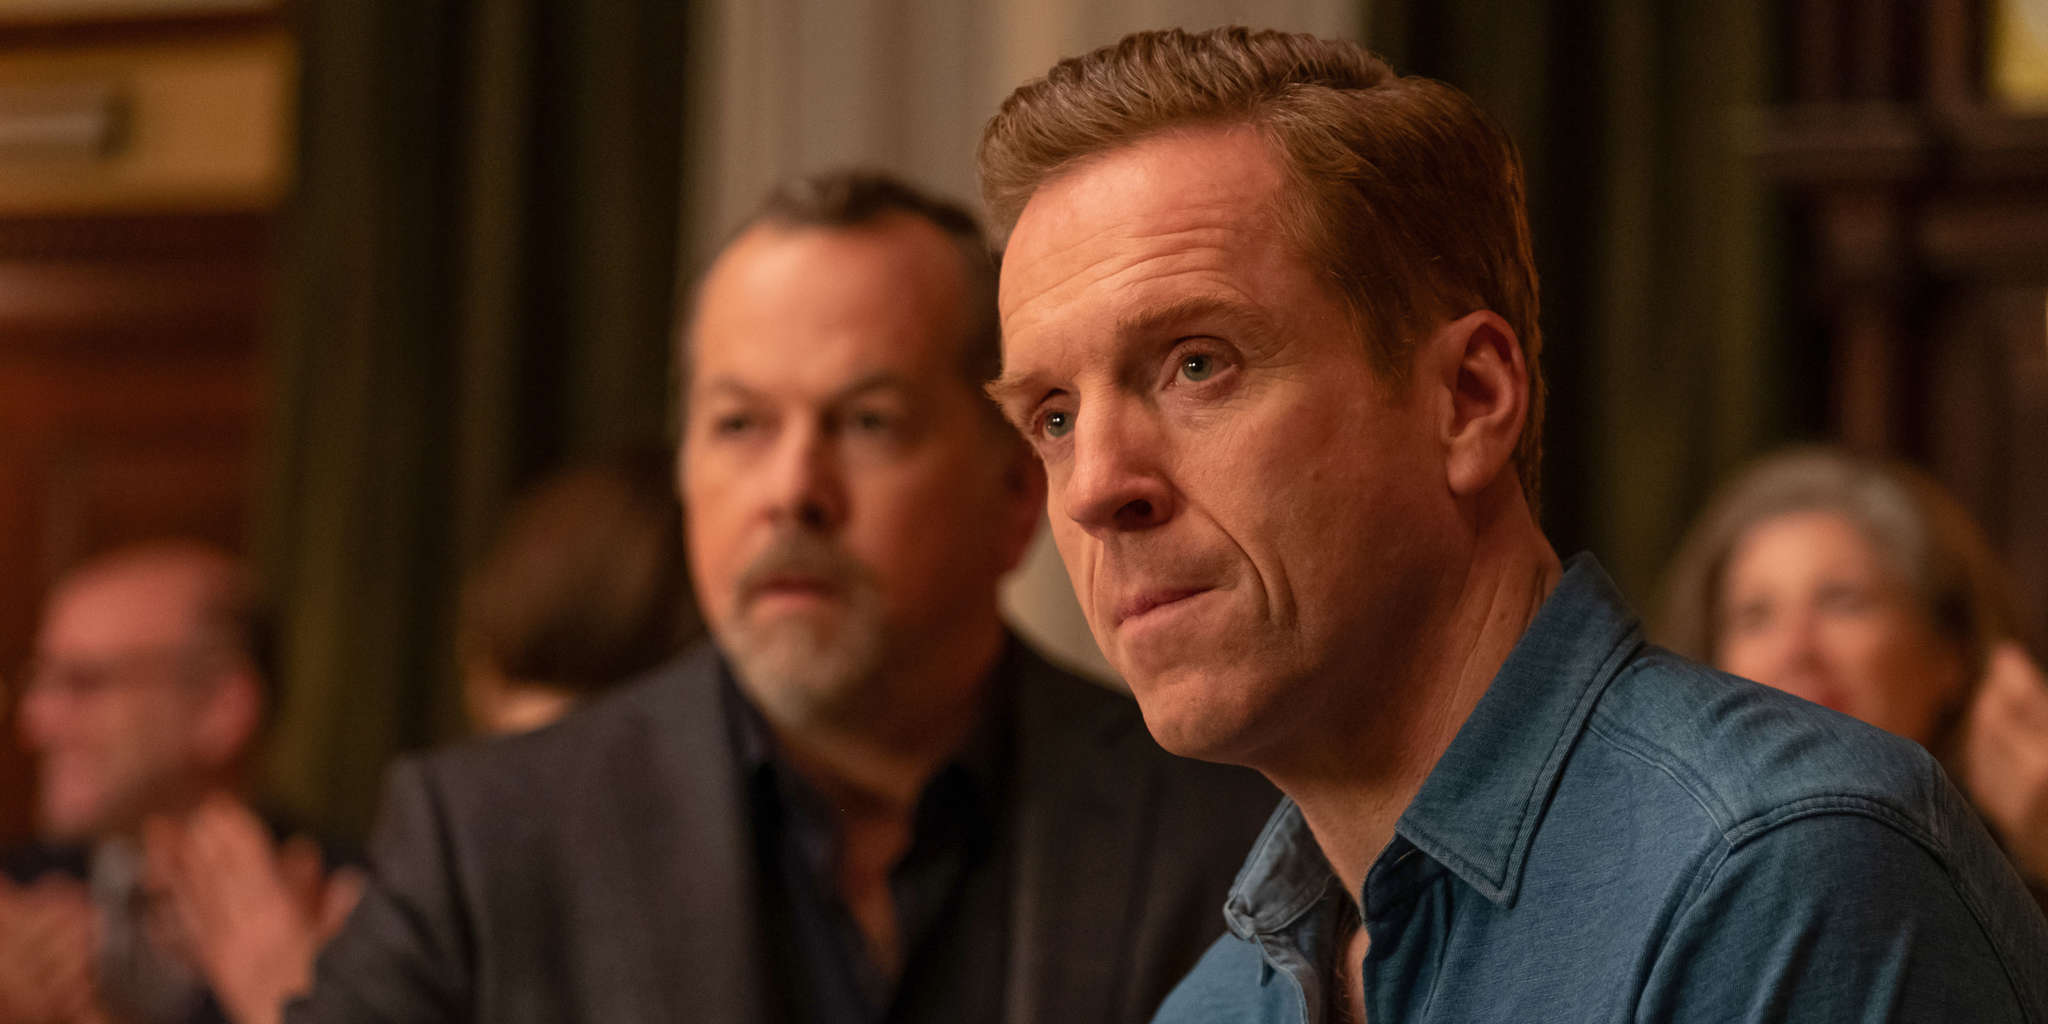 Best-bets for Aug. 13: “Billions” starts, “1883” ends